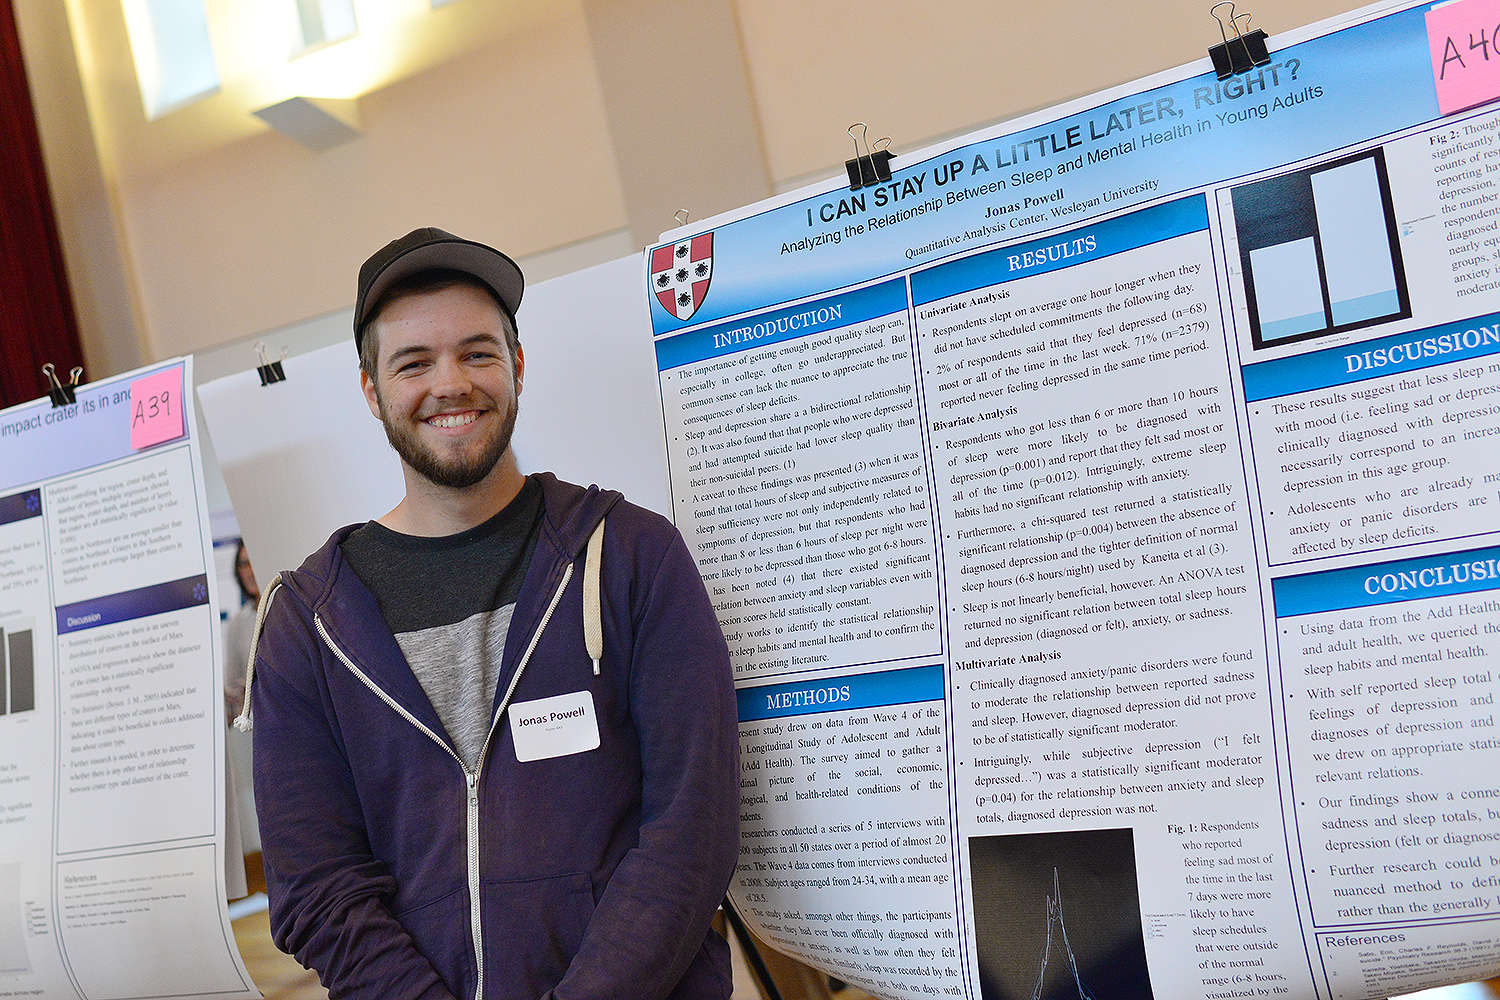 Jonas Powell ’18 presented his study titled “I Can Stay Up a Little Later, Right? Analyzing the Relationship Between Sleep and Mental Health in Young Adults” during the QAC poster session.